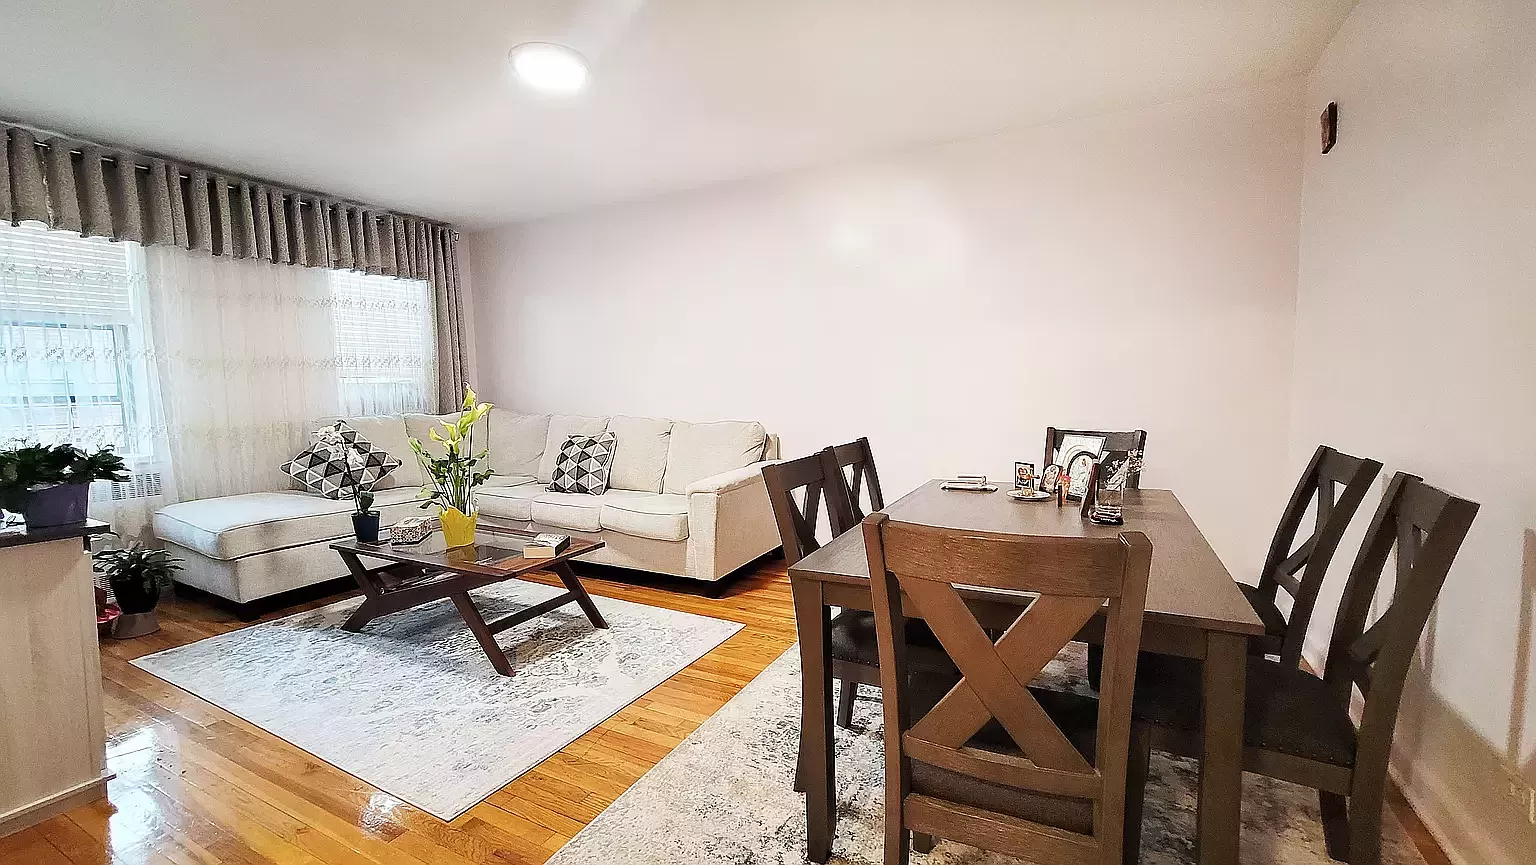 House for Sale in Rego Park, Queens New York